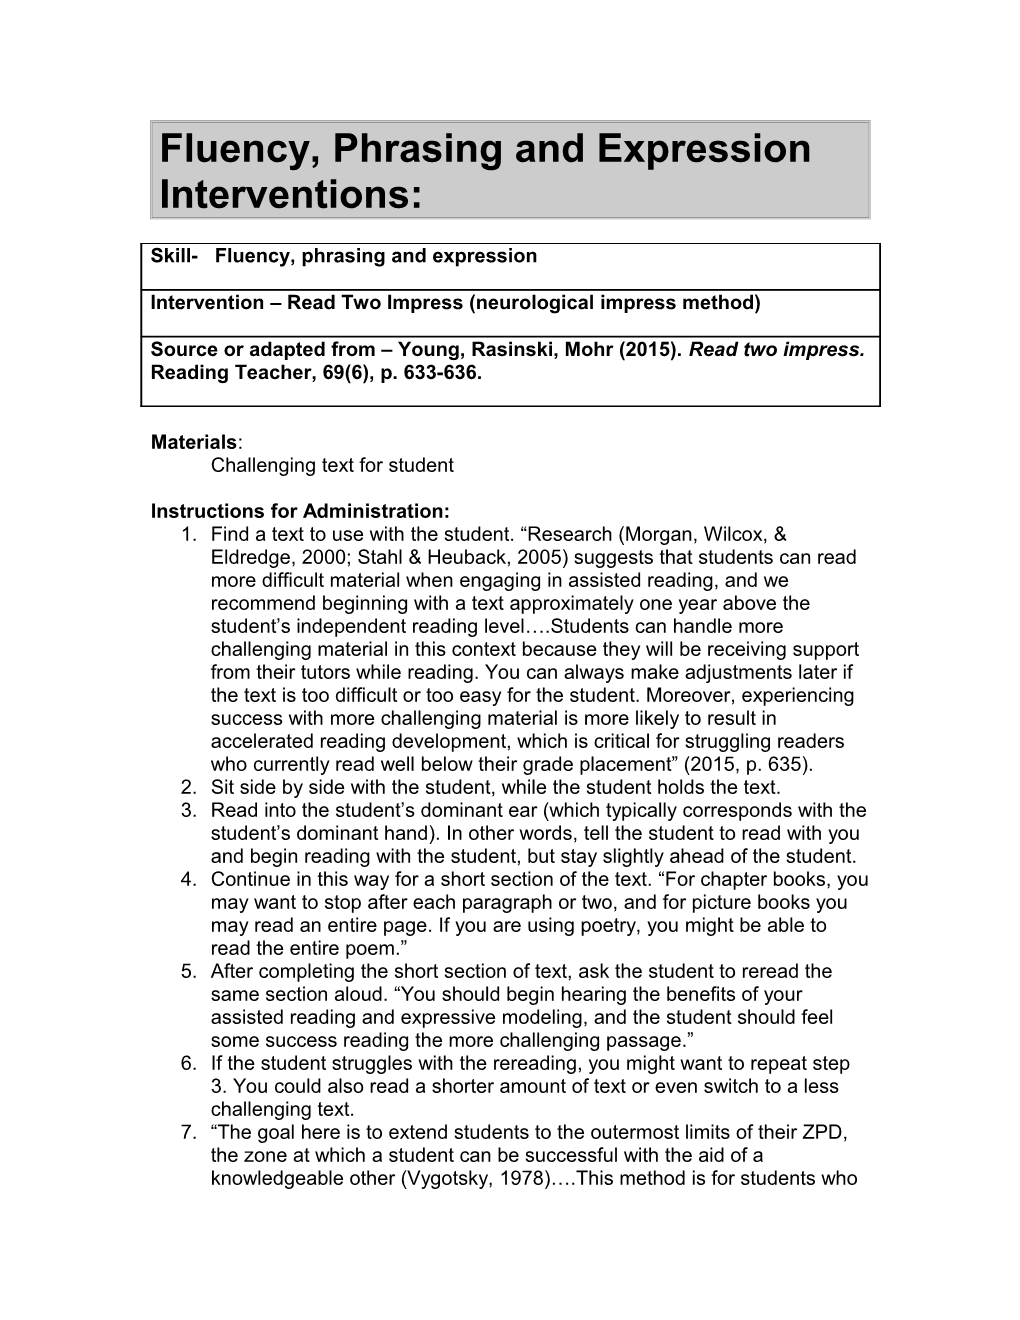 Timed Reading, Phrasing and Expression Interventions